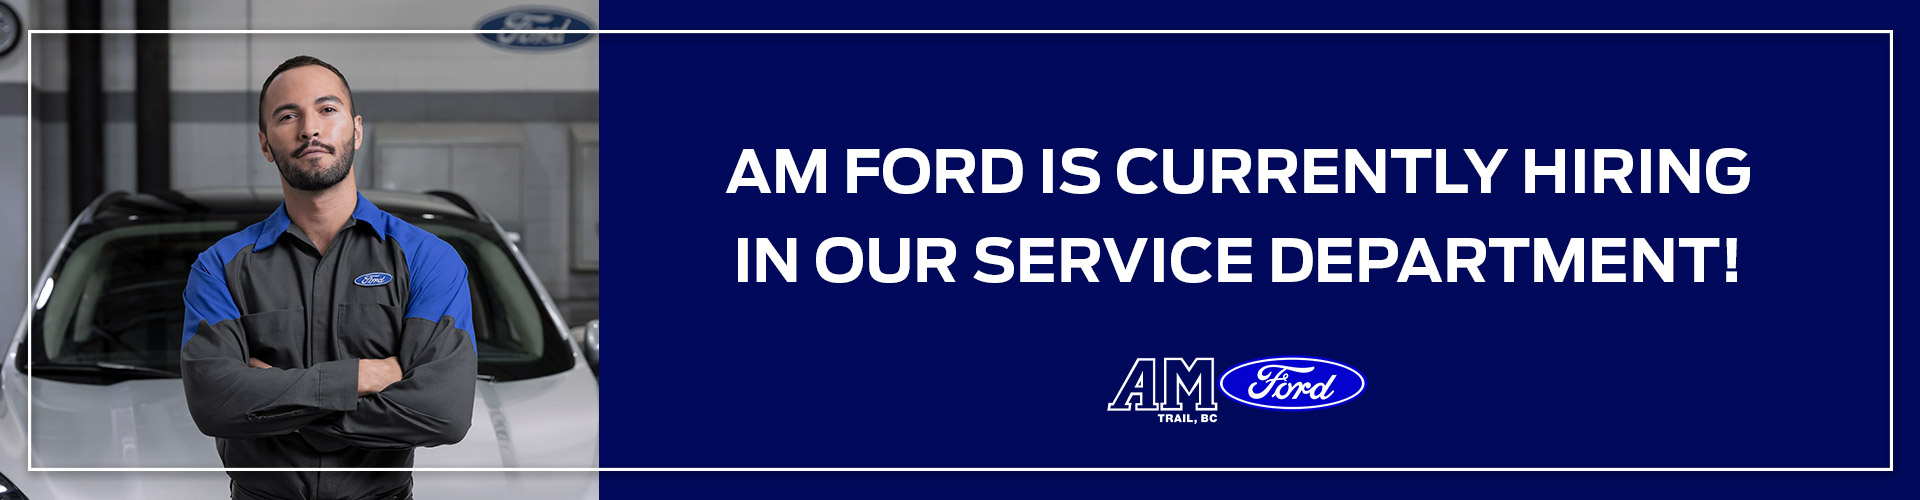 We're Hiring in Our Service Department | AM Ford | Trail, BC